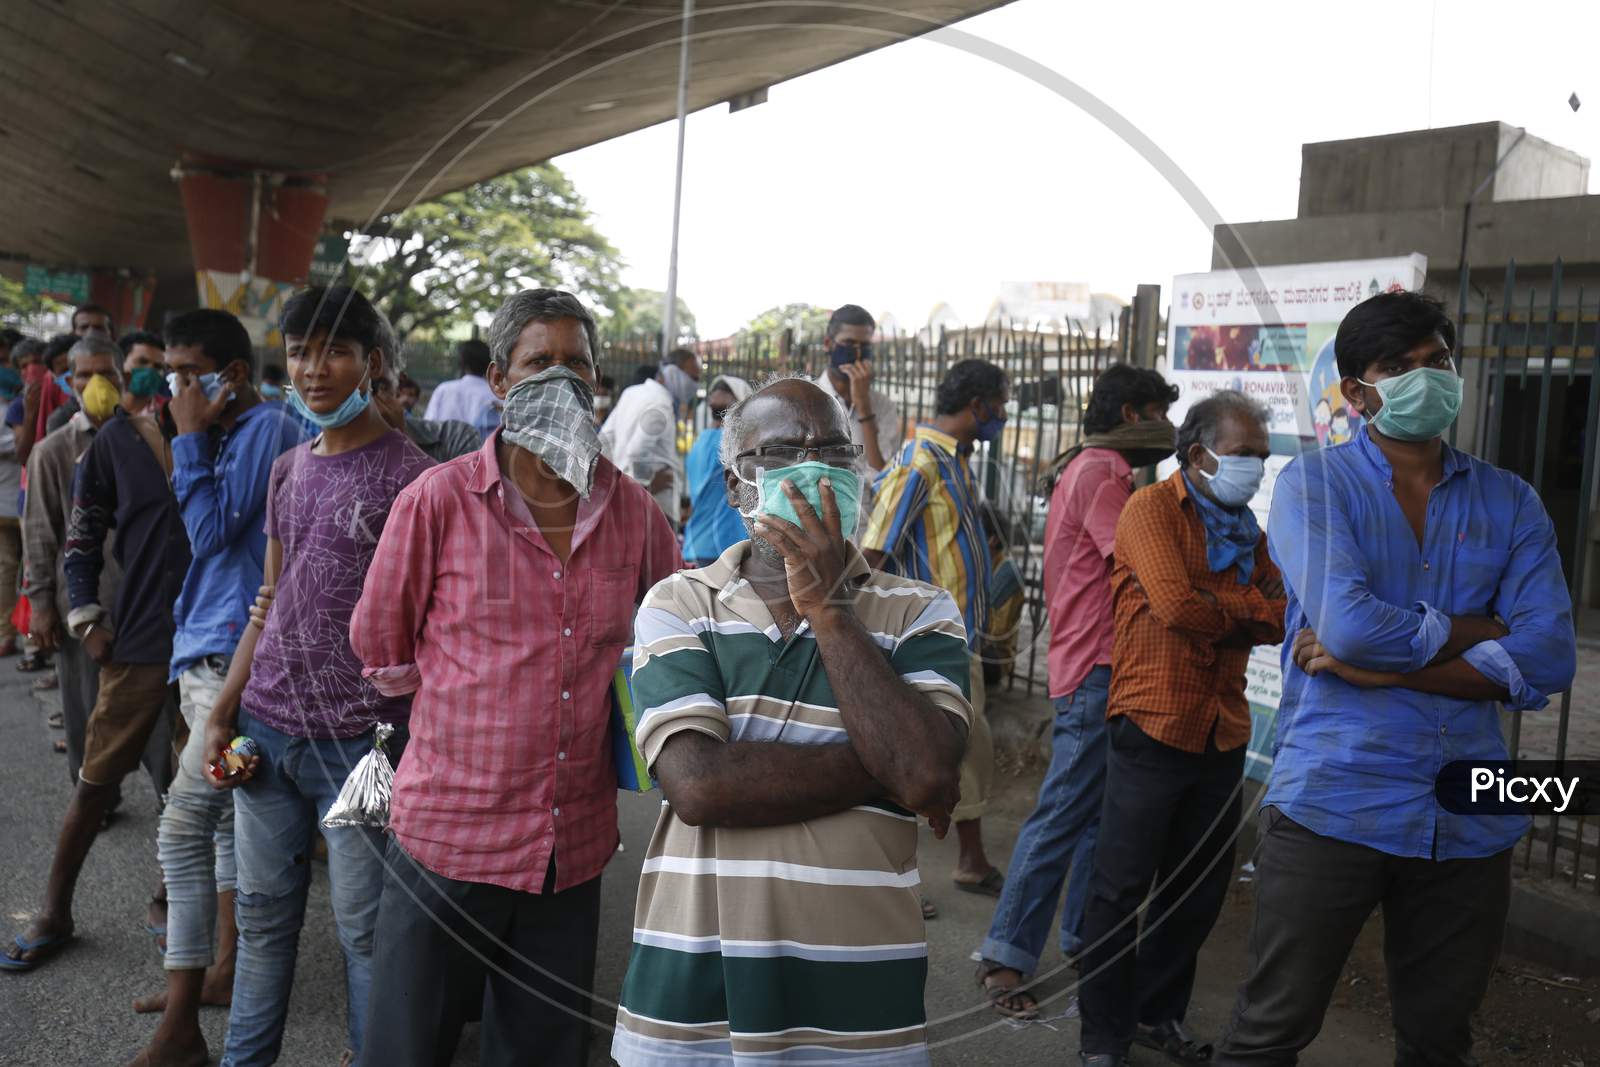 Homeless people wait for food to be distributed on a street during the nationwide lockdown to stop the spread of Coronavirus (COVID-19) in Bangalore, India, May 02, 2020.